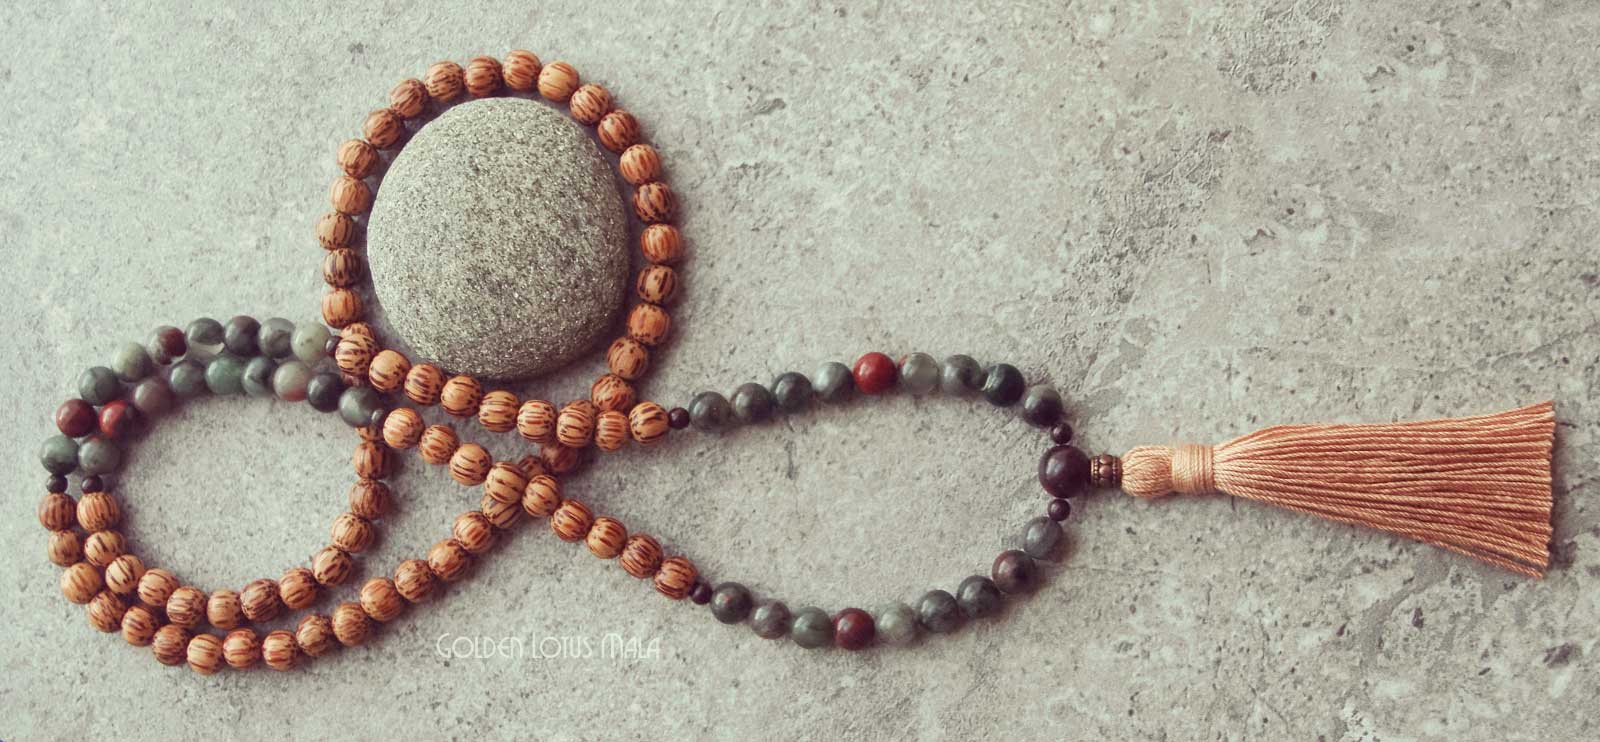 meditation beads meaning